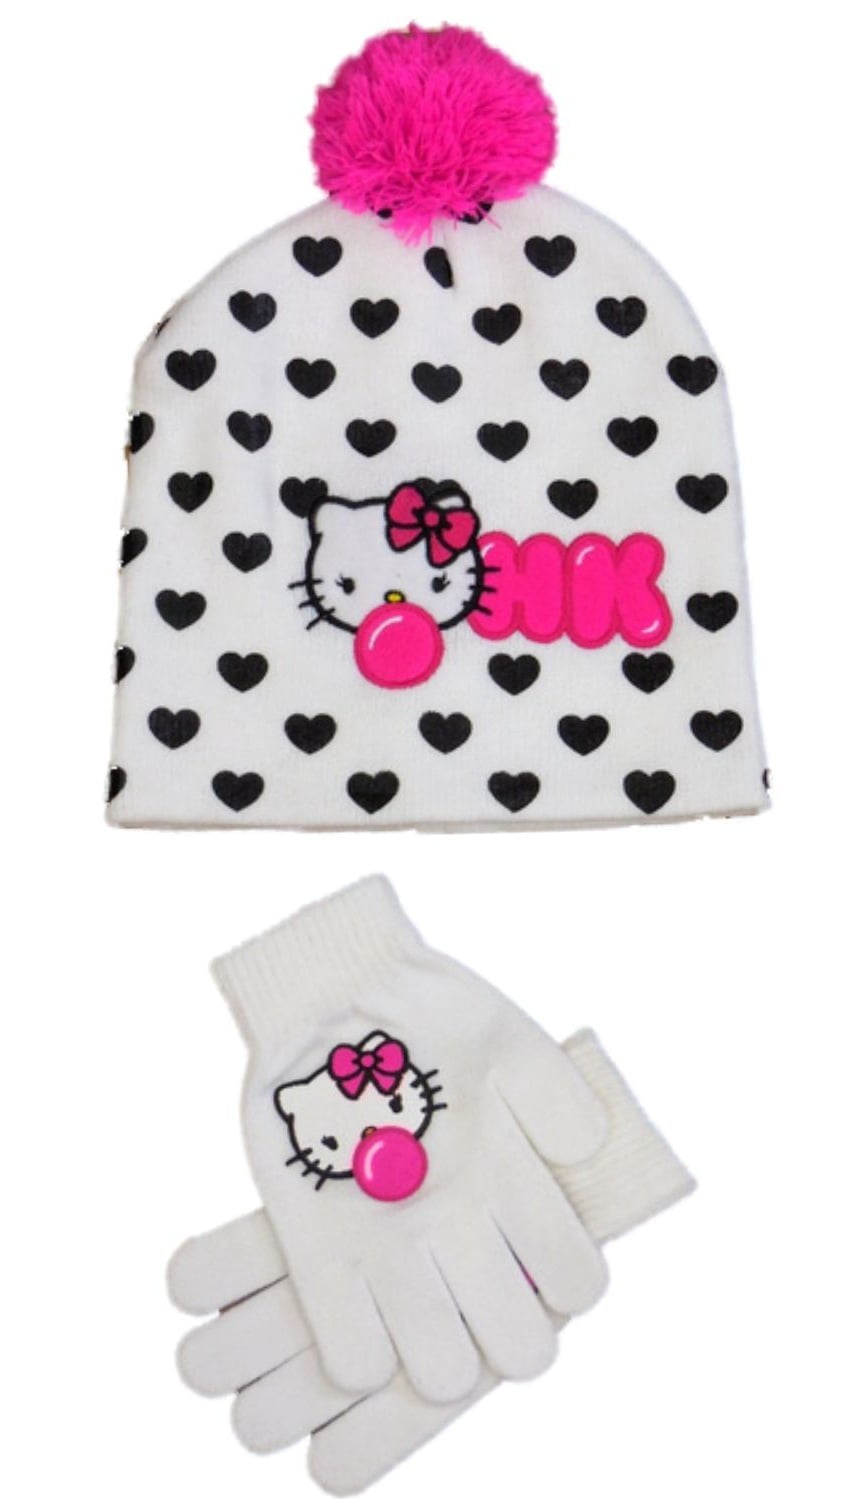 Girl's Hello Kitty Knit Beanie Hat Cap One Size Fits Most Pink Polka Dot Sanrio 